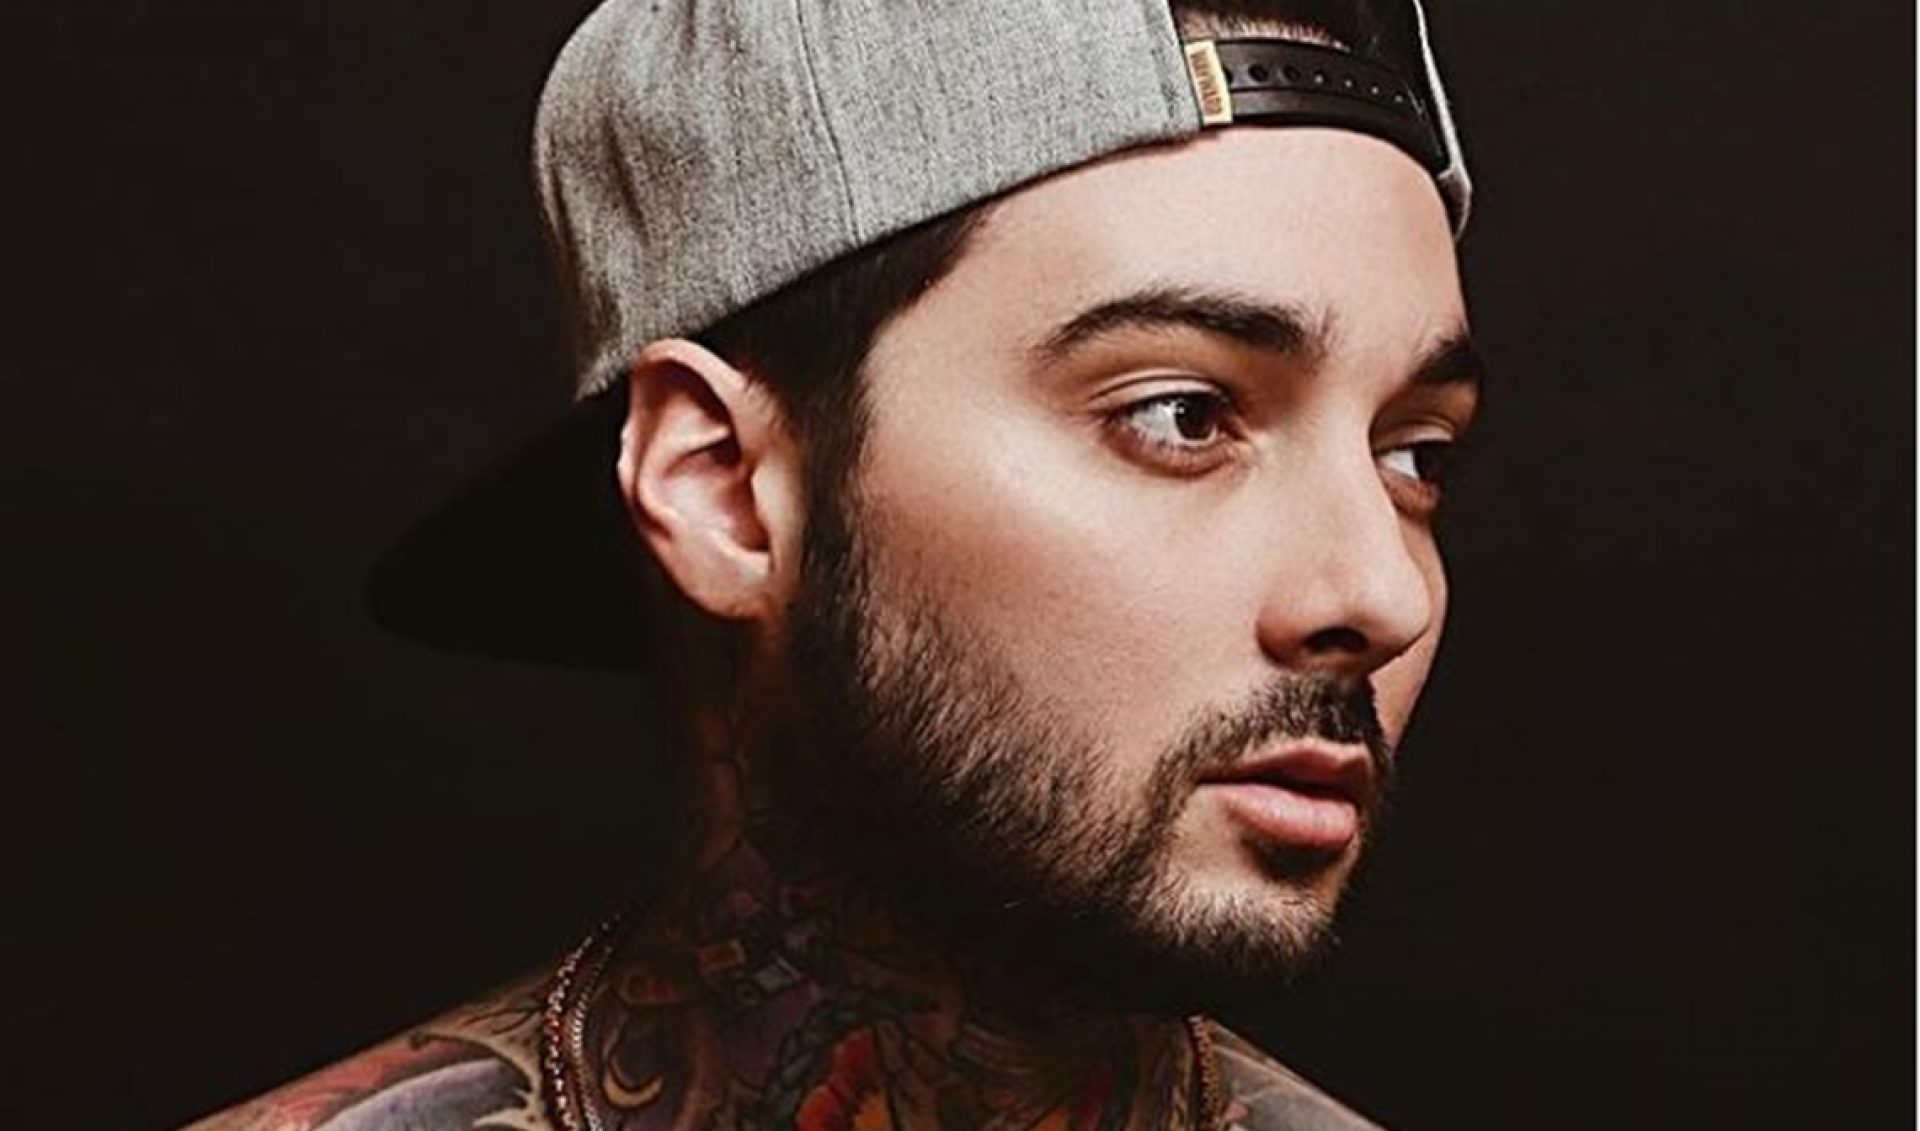 Tempel Problemer hjælp YouTube Tattooist Romeo Lacoste On Inappropriate Messages To Young Fans:  "Some Are Real, And Some Are Fabricated" - Tubefilter